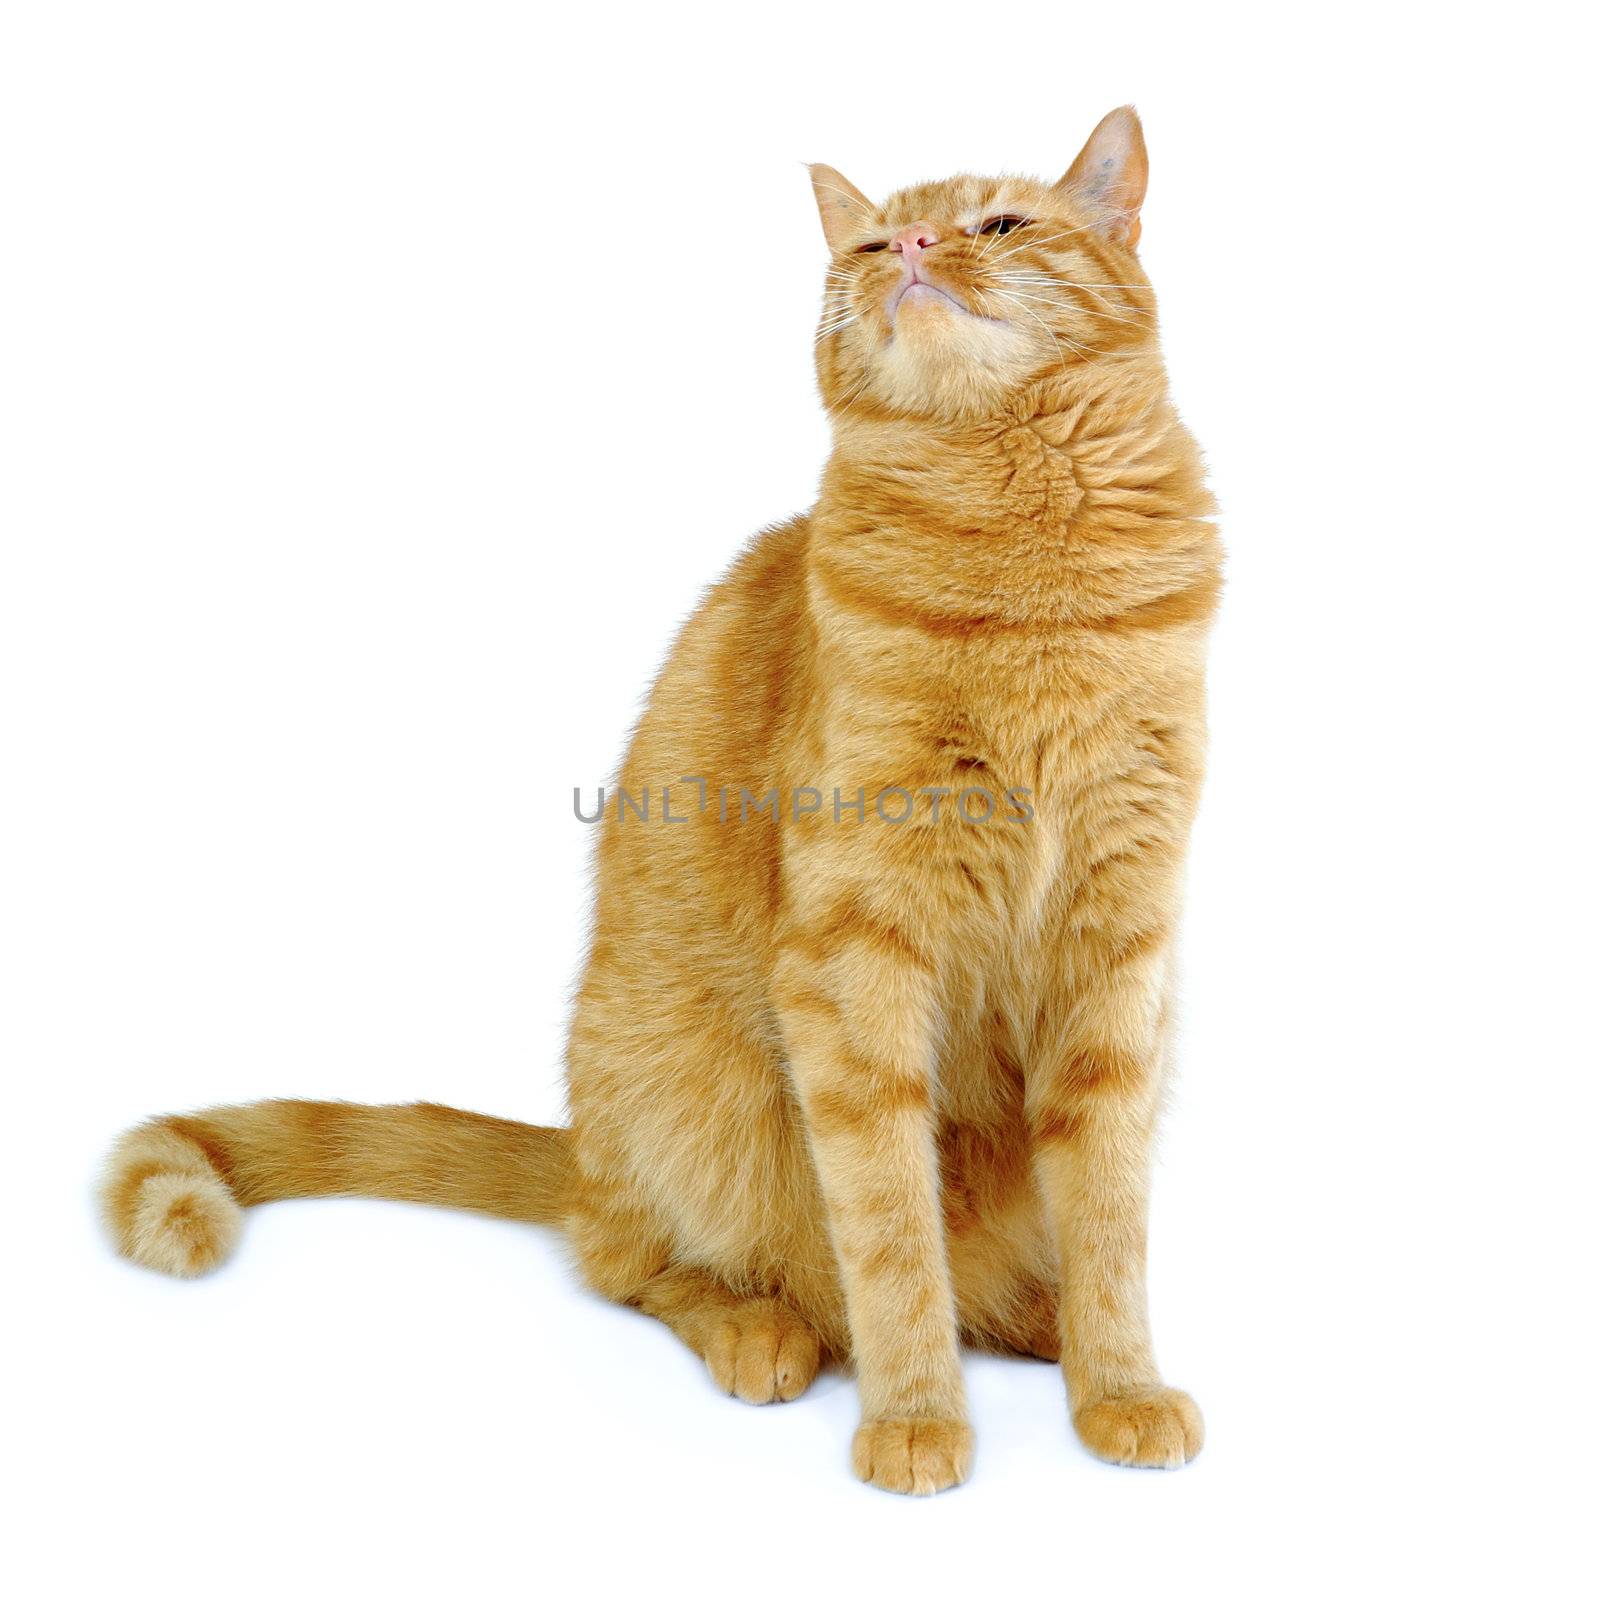 Red cat is sitting on a clean white background